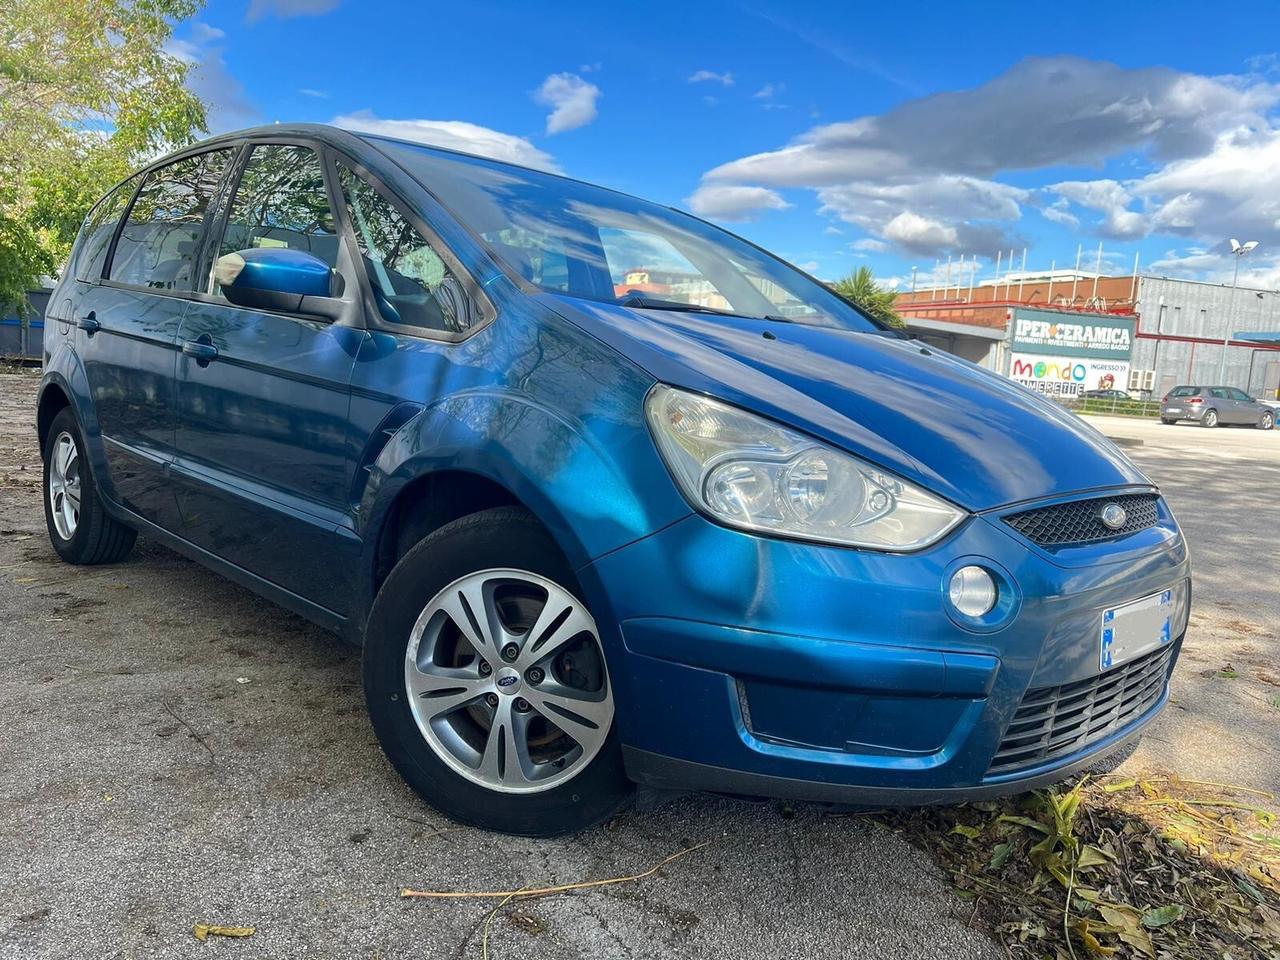 Ford smax 2.0 diesel anno 2008